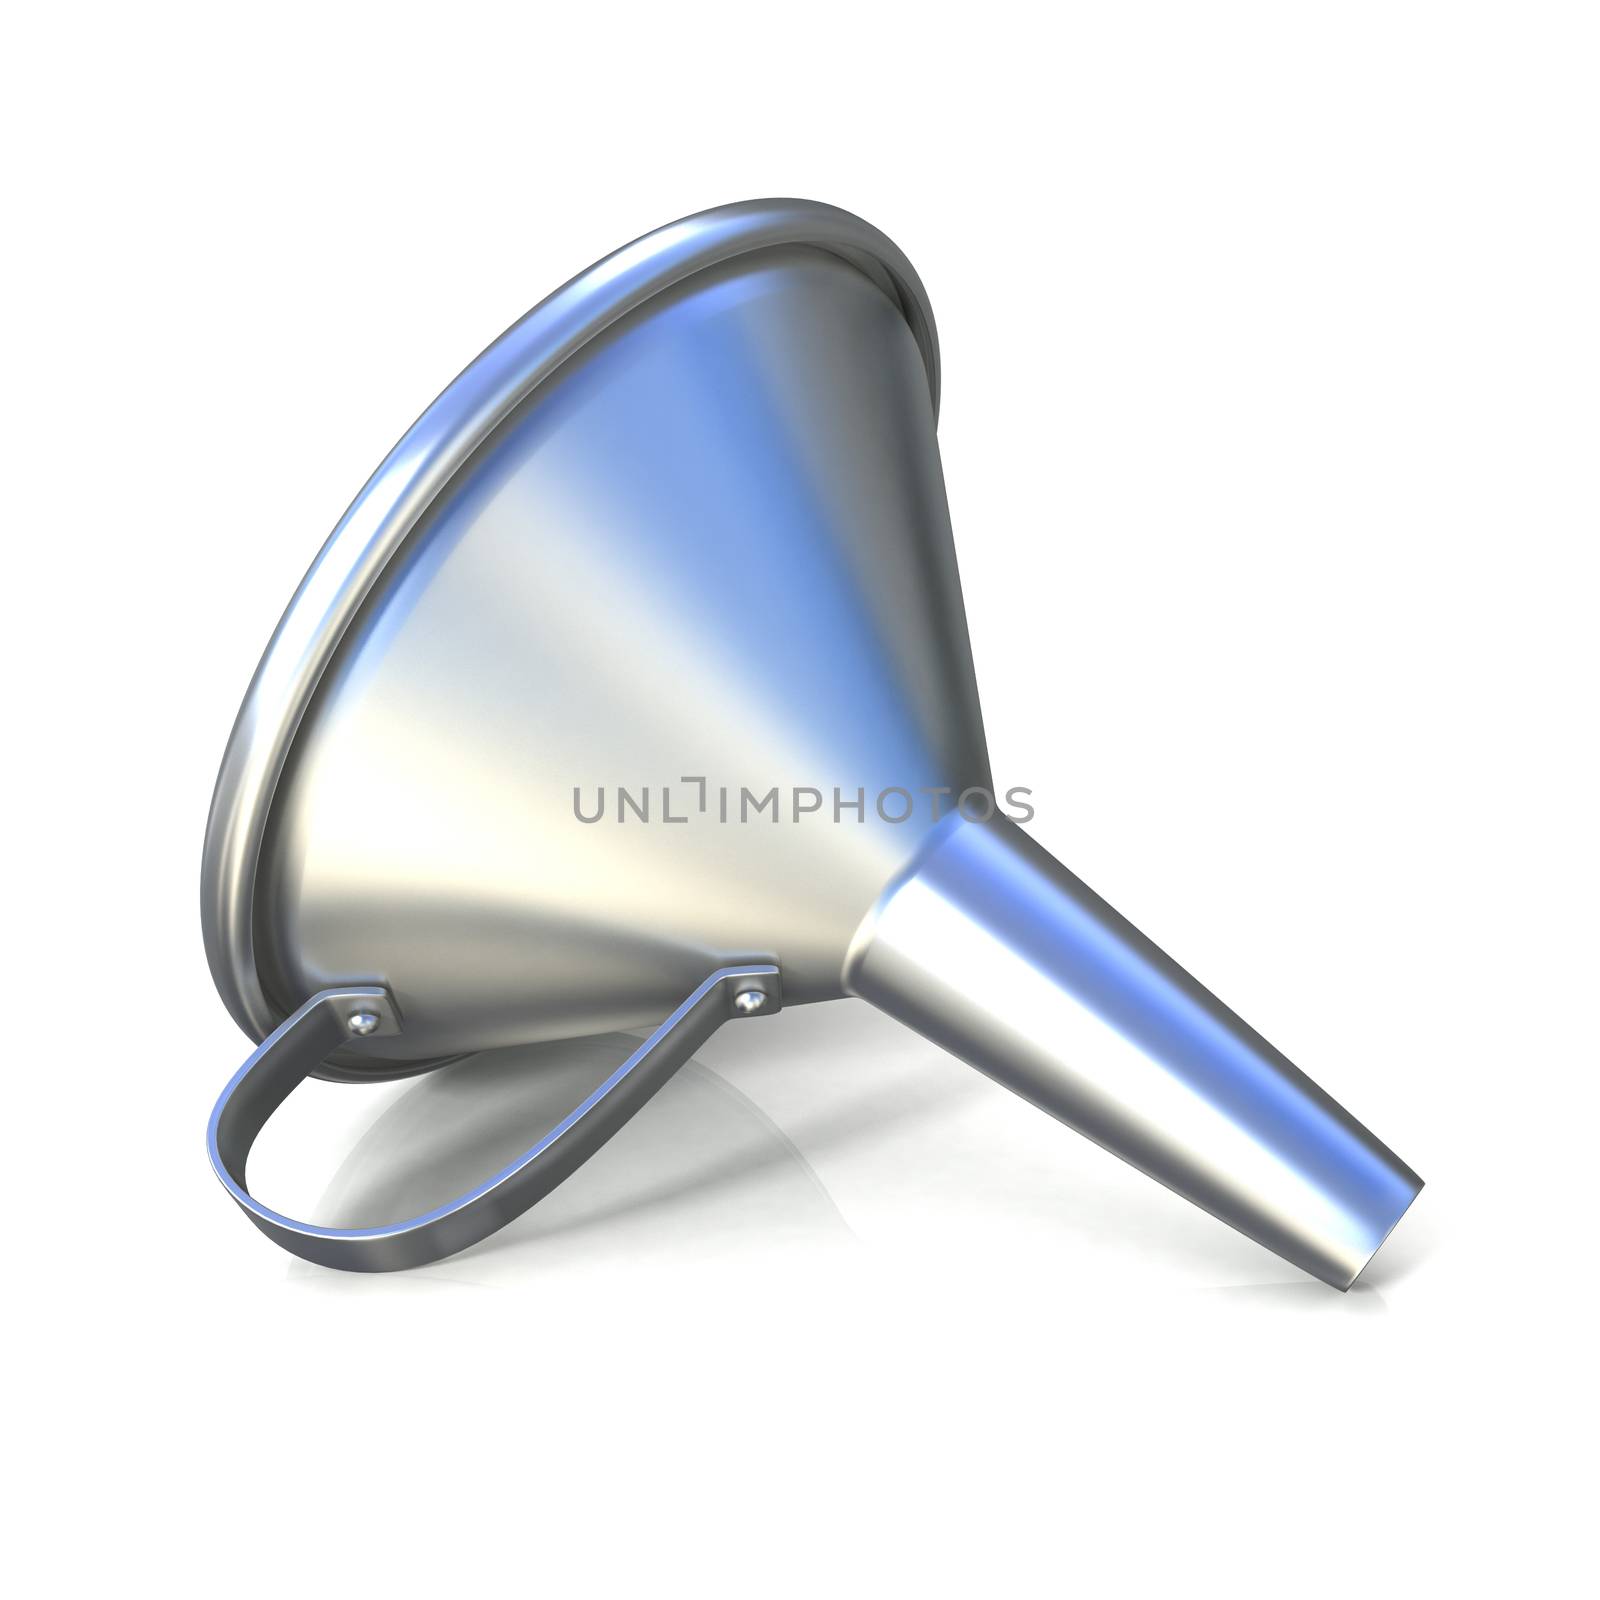 Steel funnel. 3D render illustration, isolated on white. Side view